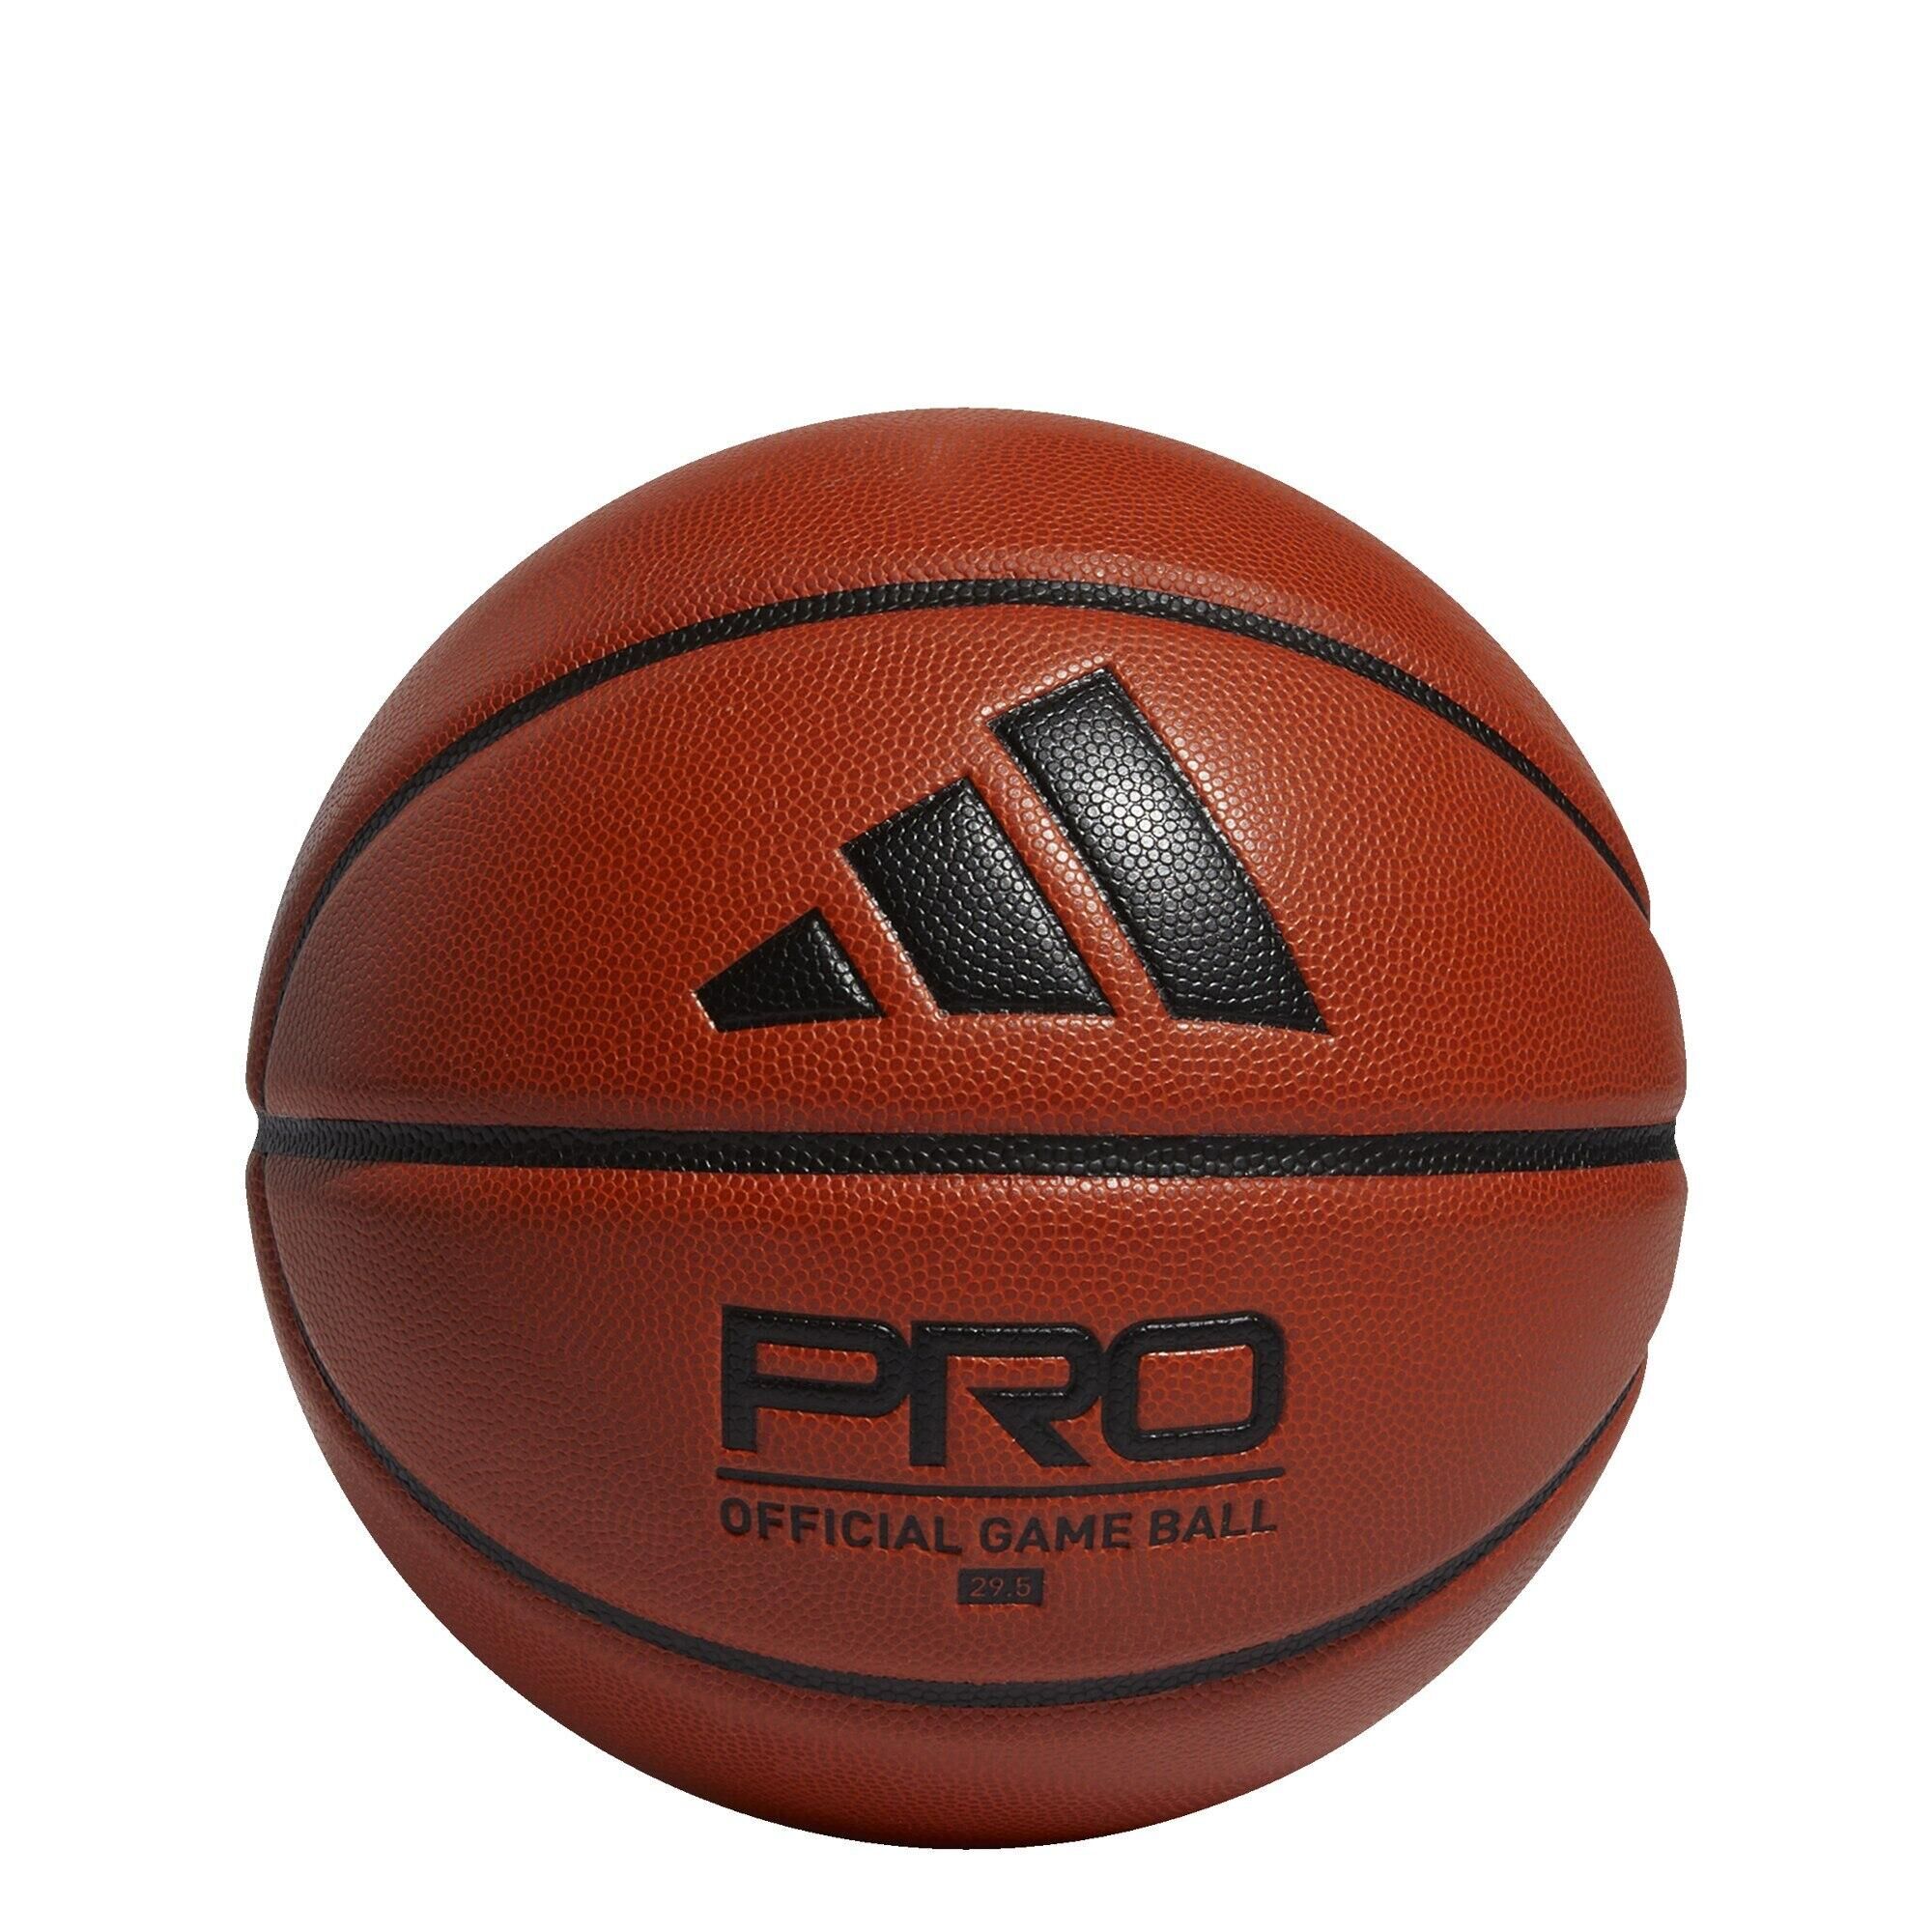 ADIDAS Pro 3.0 Official Game Ball